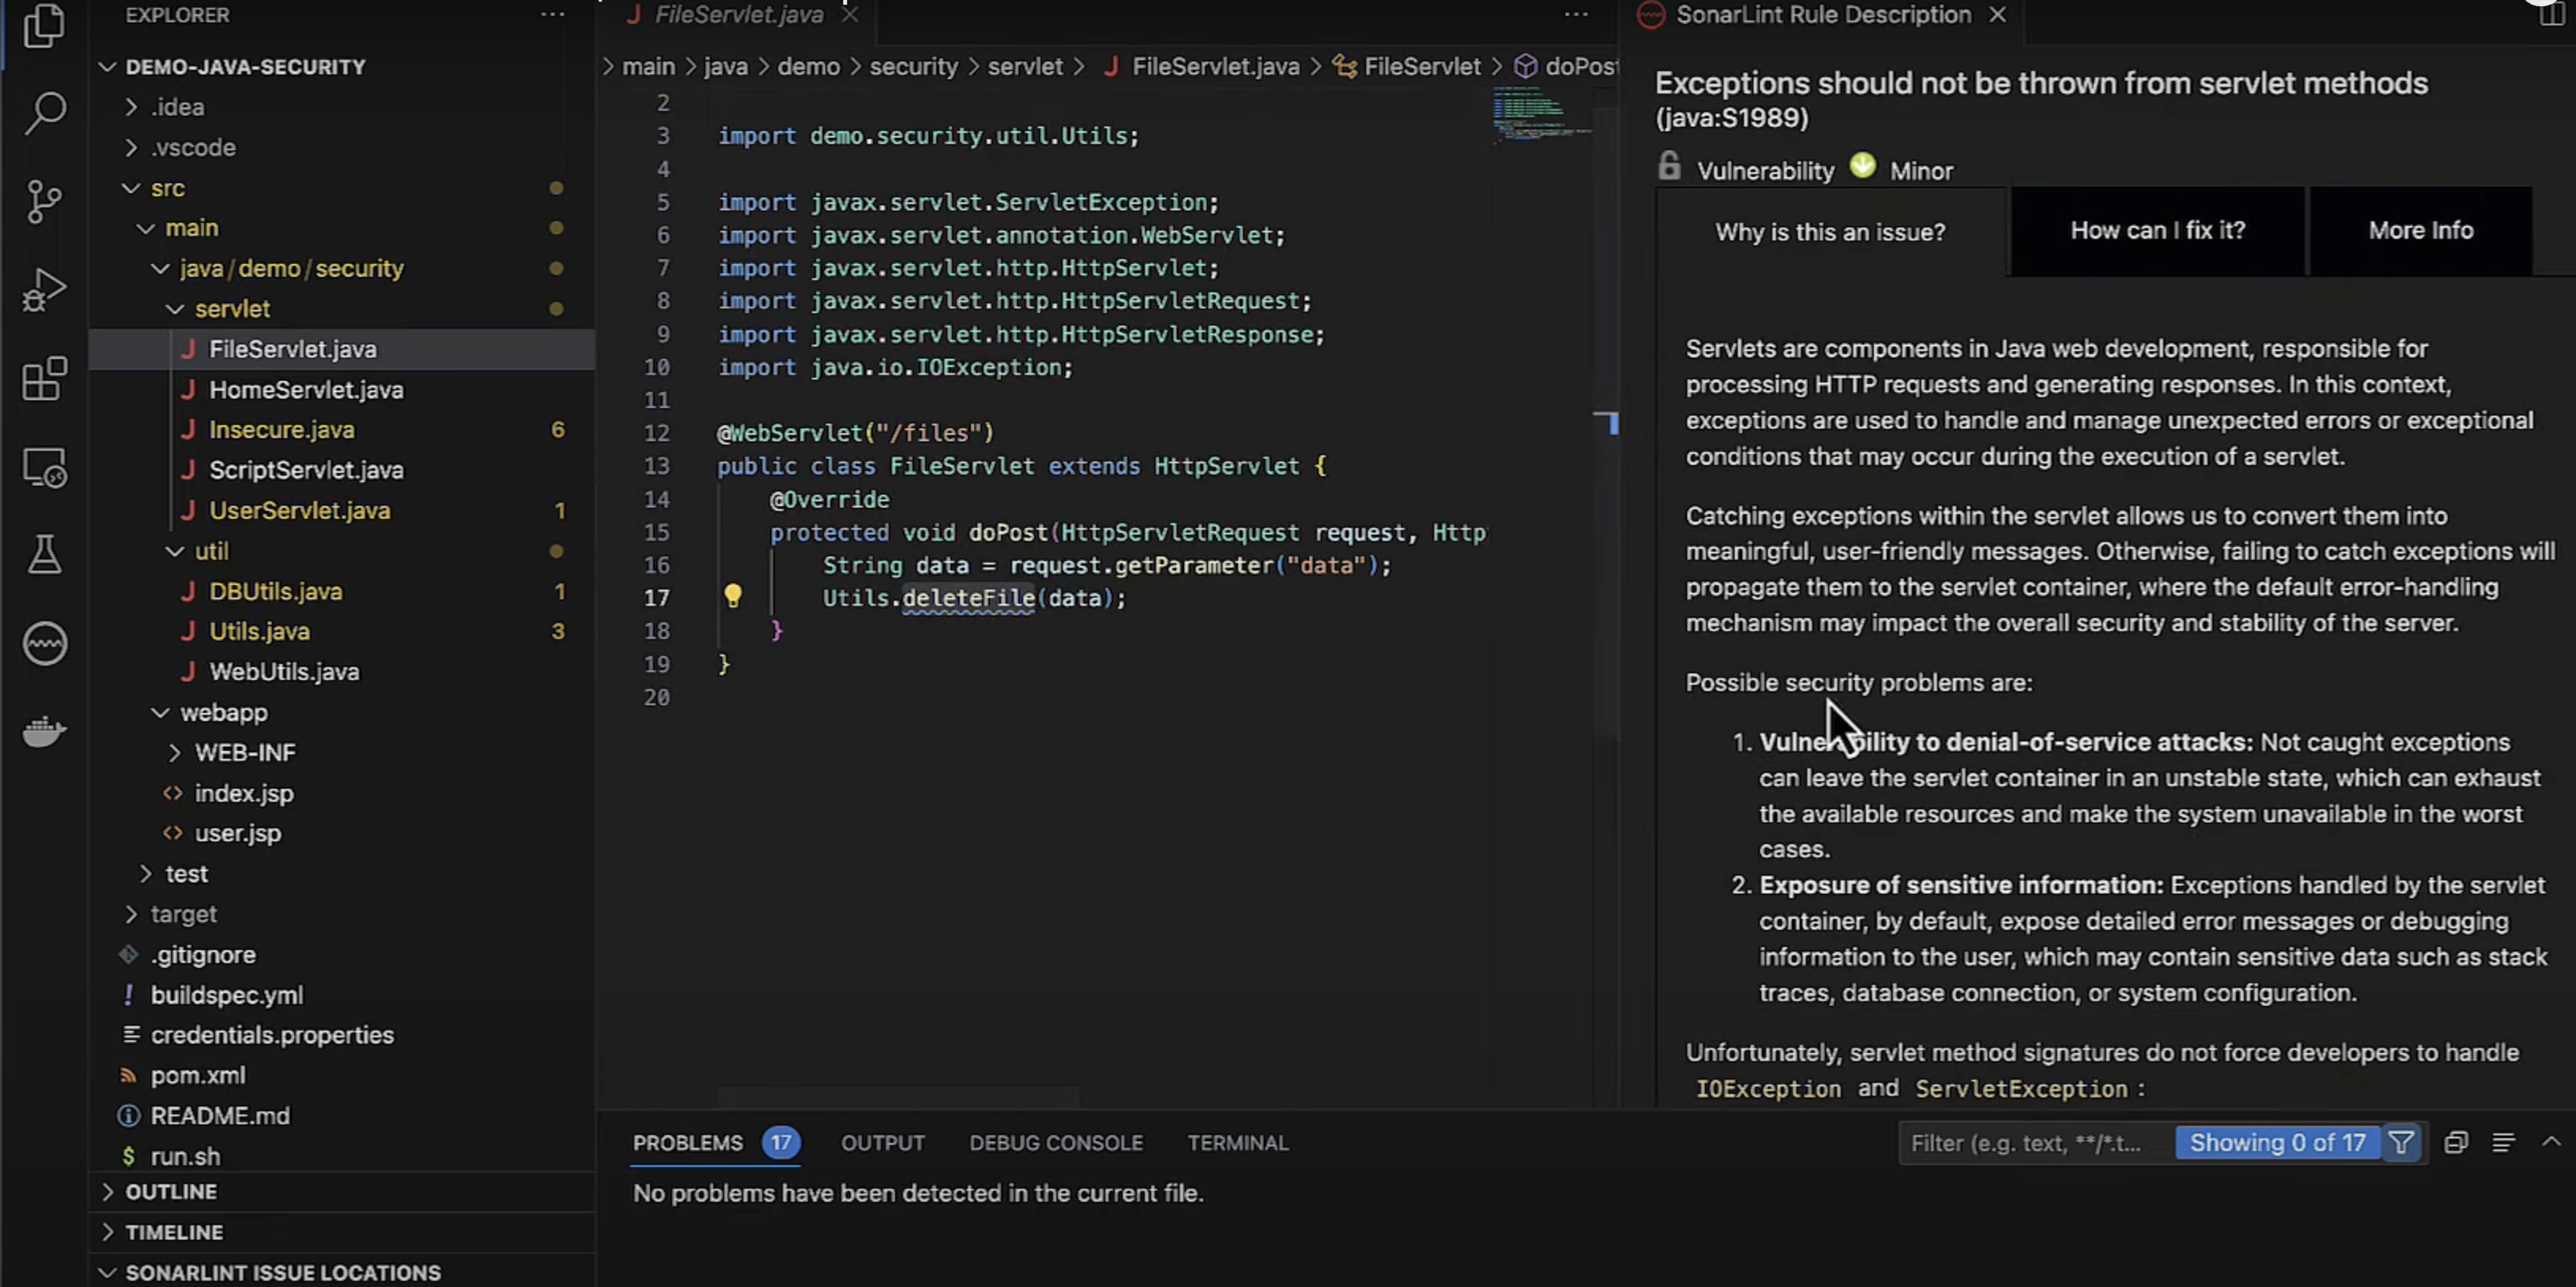 SonarLint is available for VS Code, Visual Studio, Eclipse and JetBrains IDEs. Here, SonarLint identifies and highlights issues in a Java project within VS Code. 